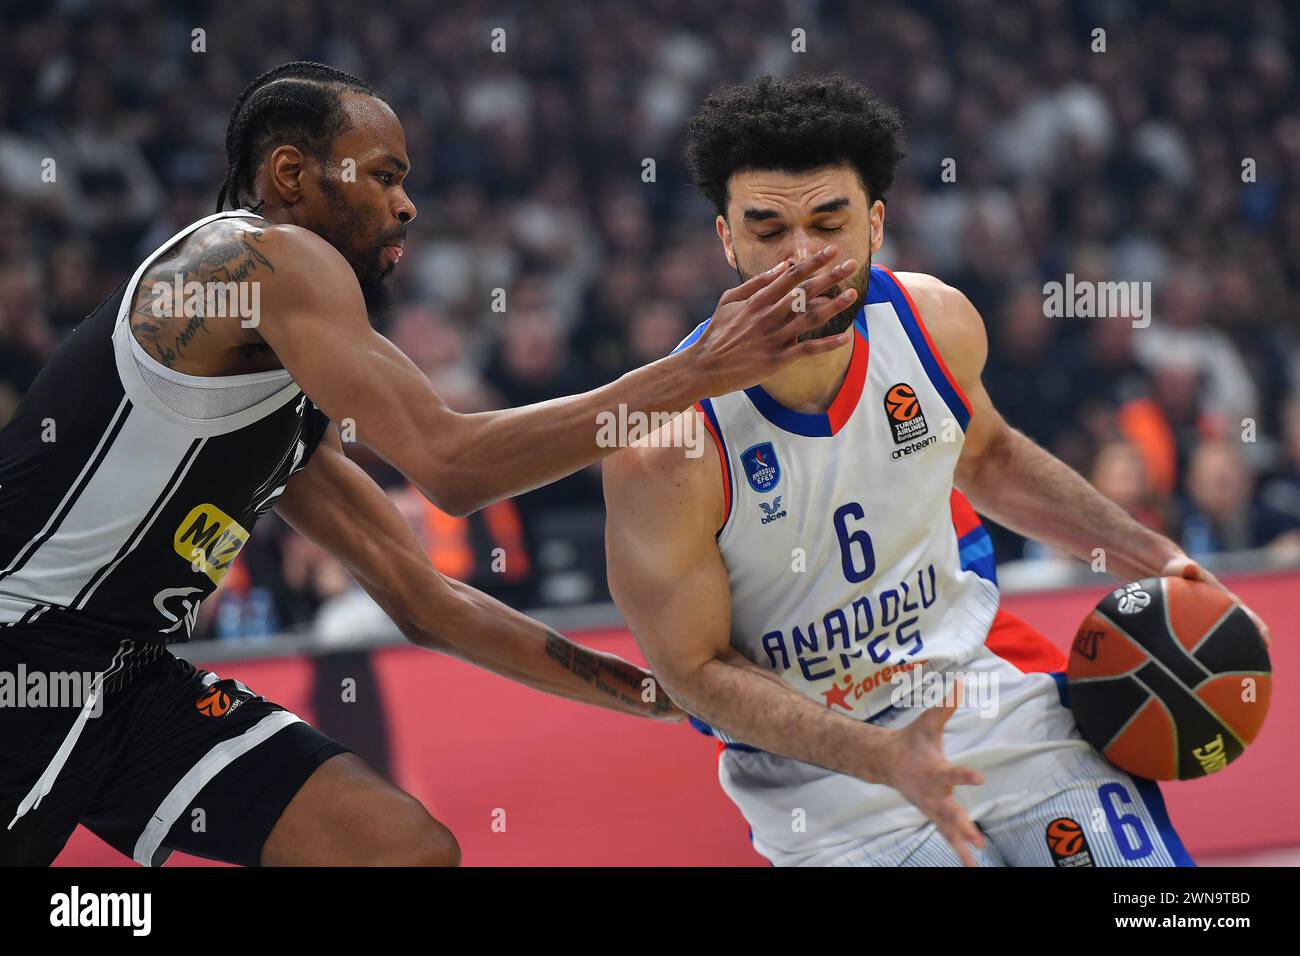 Belgrade, Serbia, 29 February, 2023. Elijah Bryant of Anadolu Efes Istanbul competes against Kevin Punter of Partizan Mozzart Bet Belgrade during the 2023/2024 Turkish Airlines EuroLeague, Round 27 match between Partizan Mozzart Bet Belgrade and Anadolu Efes Istanbul at Stark Arena in Belgrade, Serbia. February 29, 2023. Credit: Nikola Krstic/Alamy Stock Photo